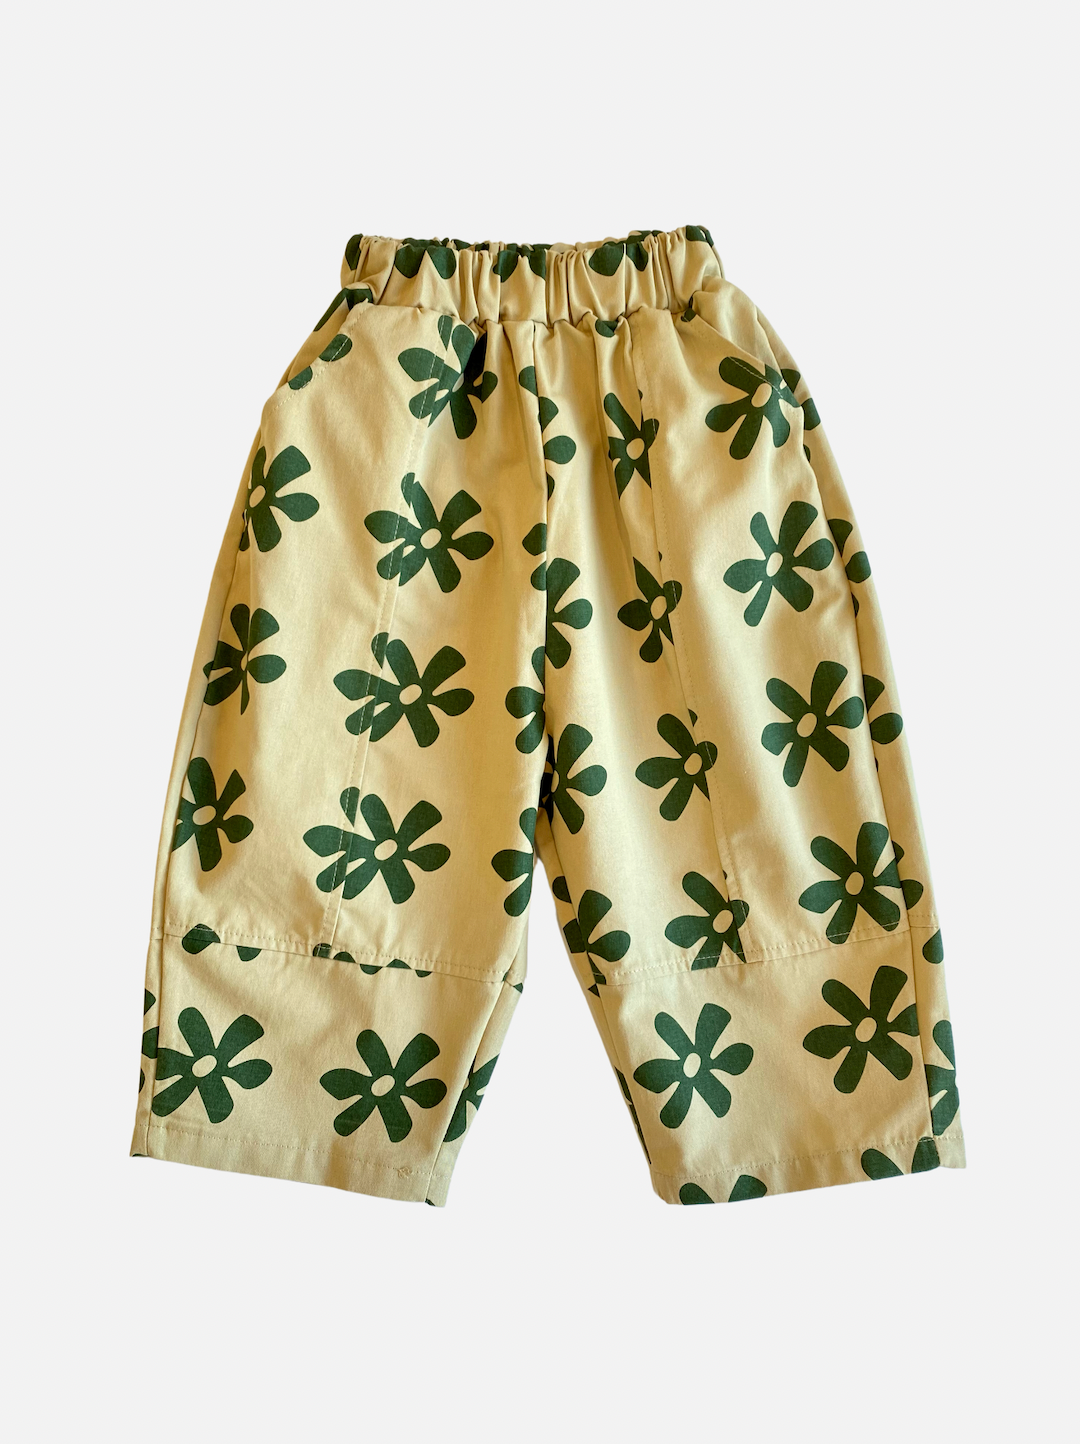 Khaki | A pair of kids' pants in cream with green flowers